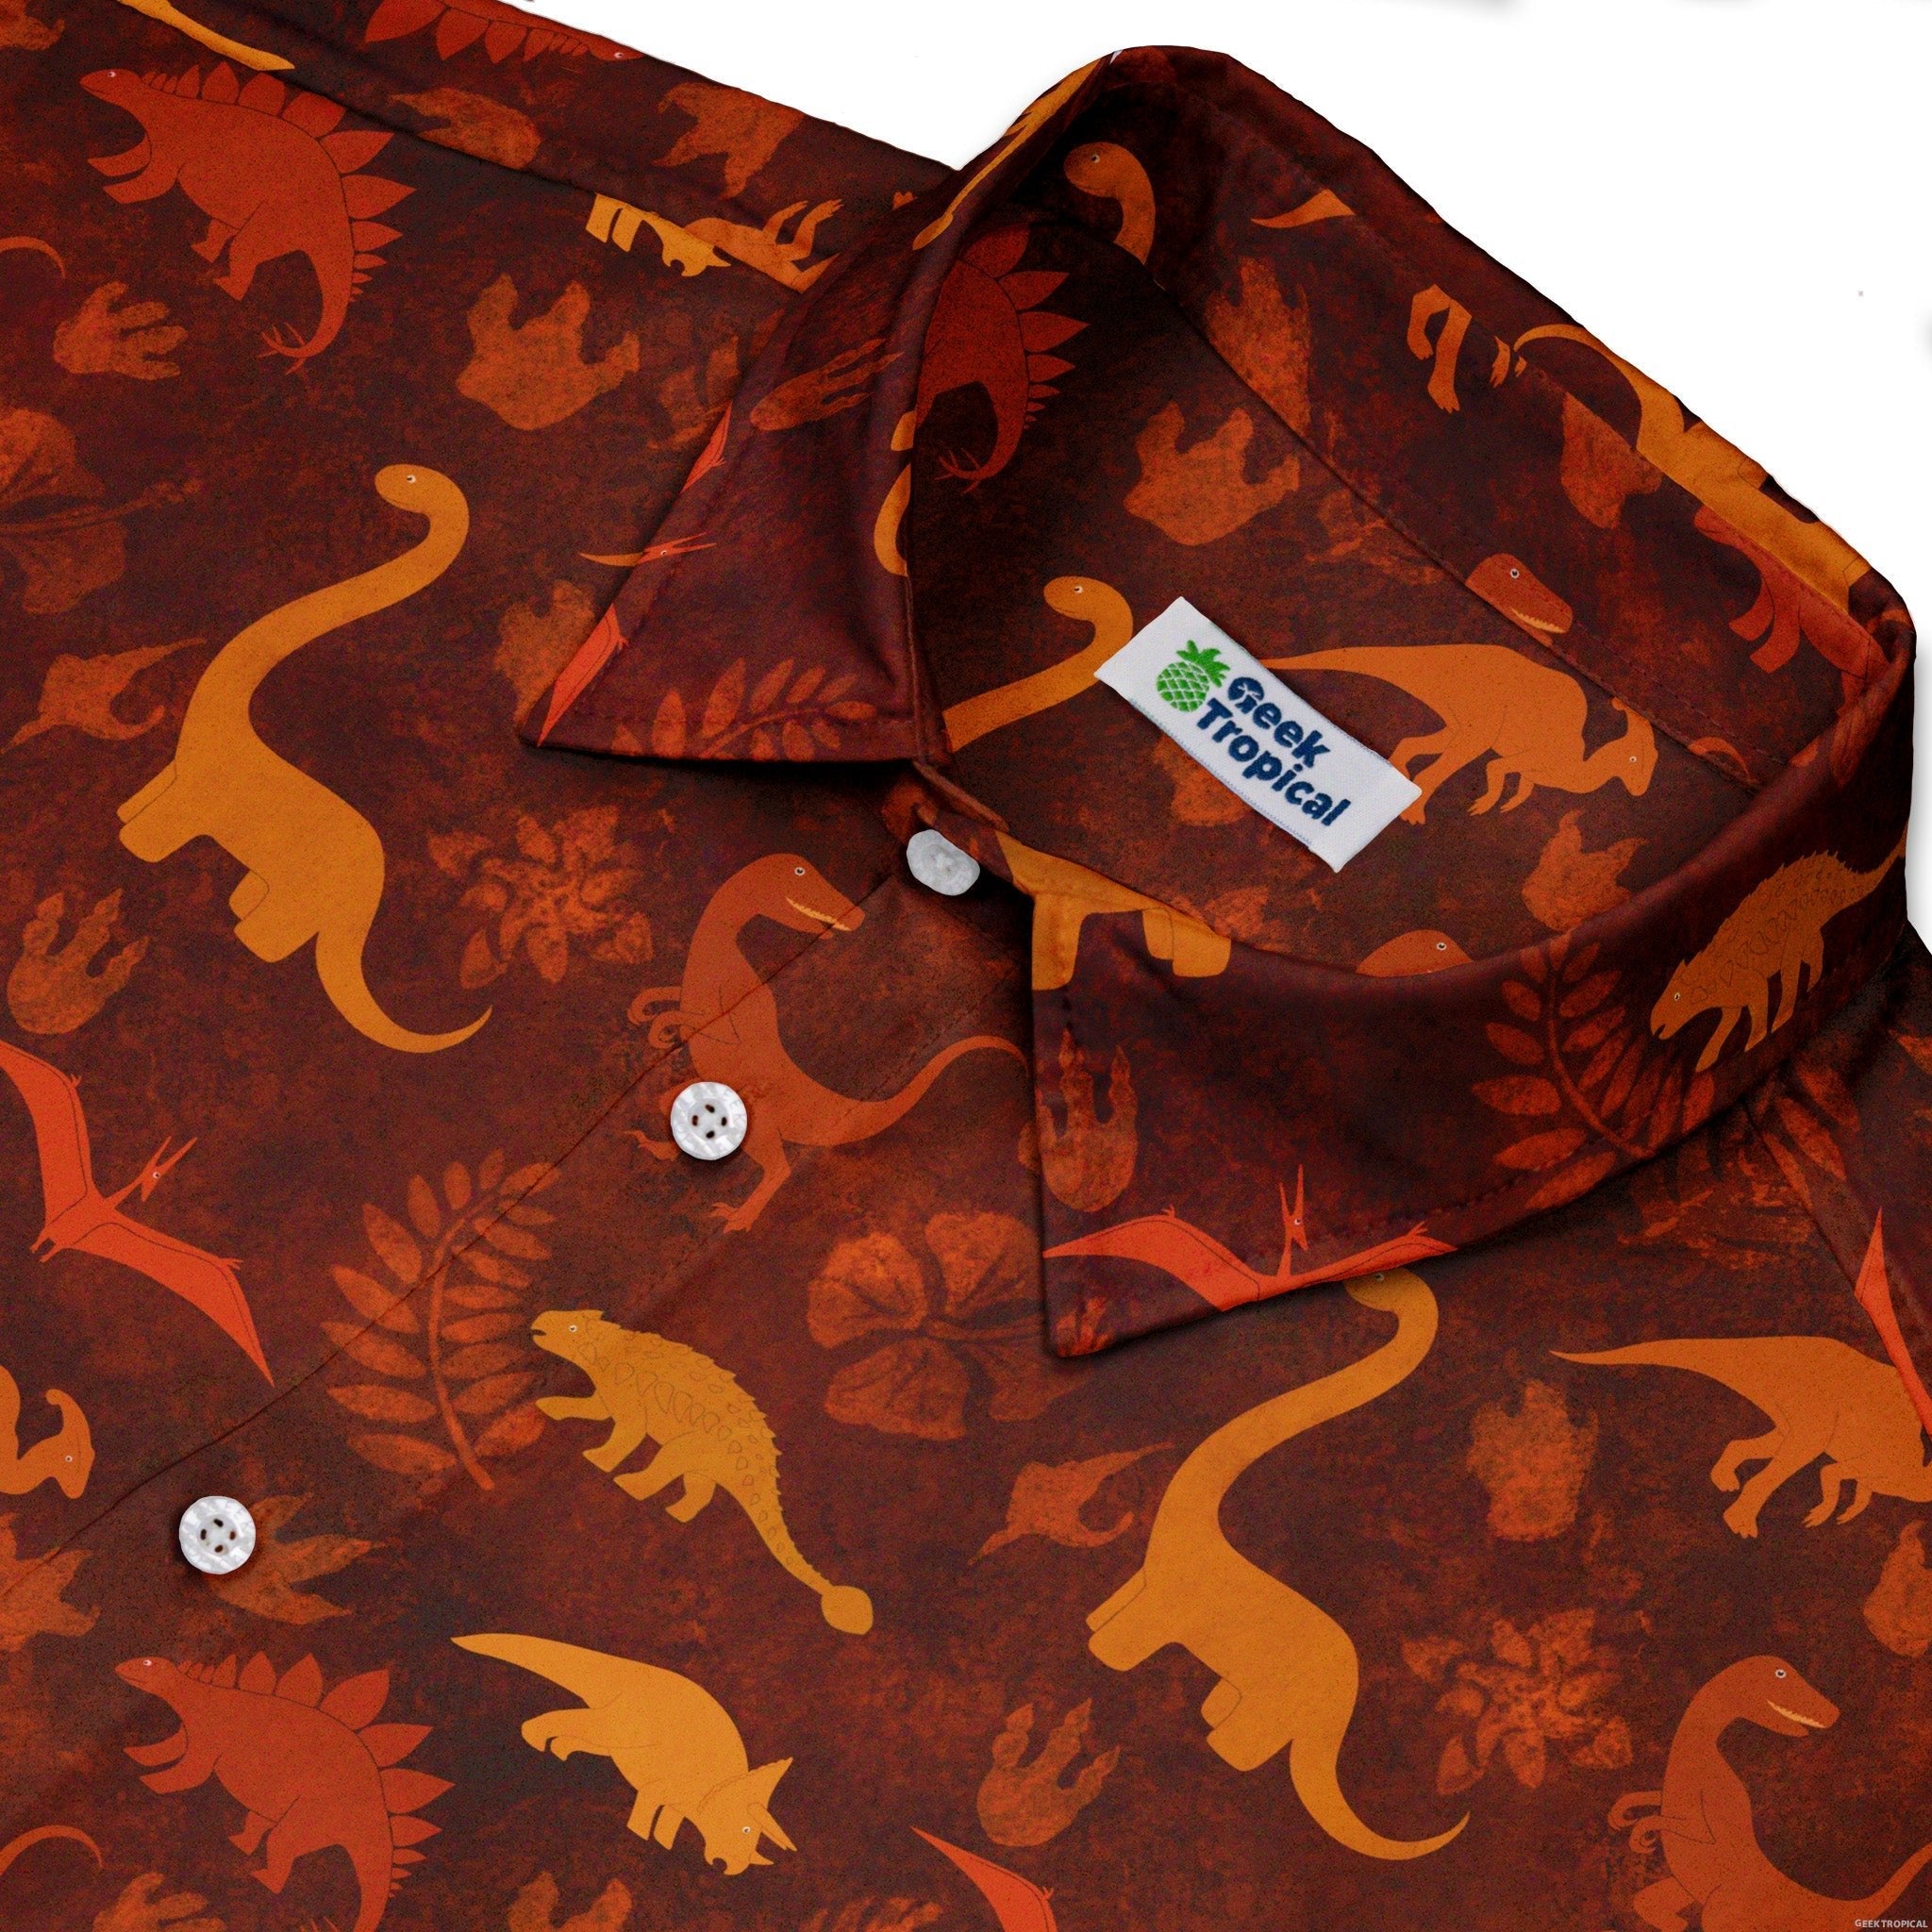 Dinosaur Tropical Fall Sunset Button Up Shirt - adult sizing - Animal Patterns - Designs by Nathan